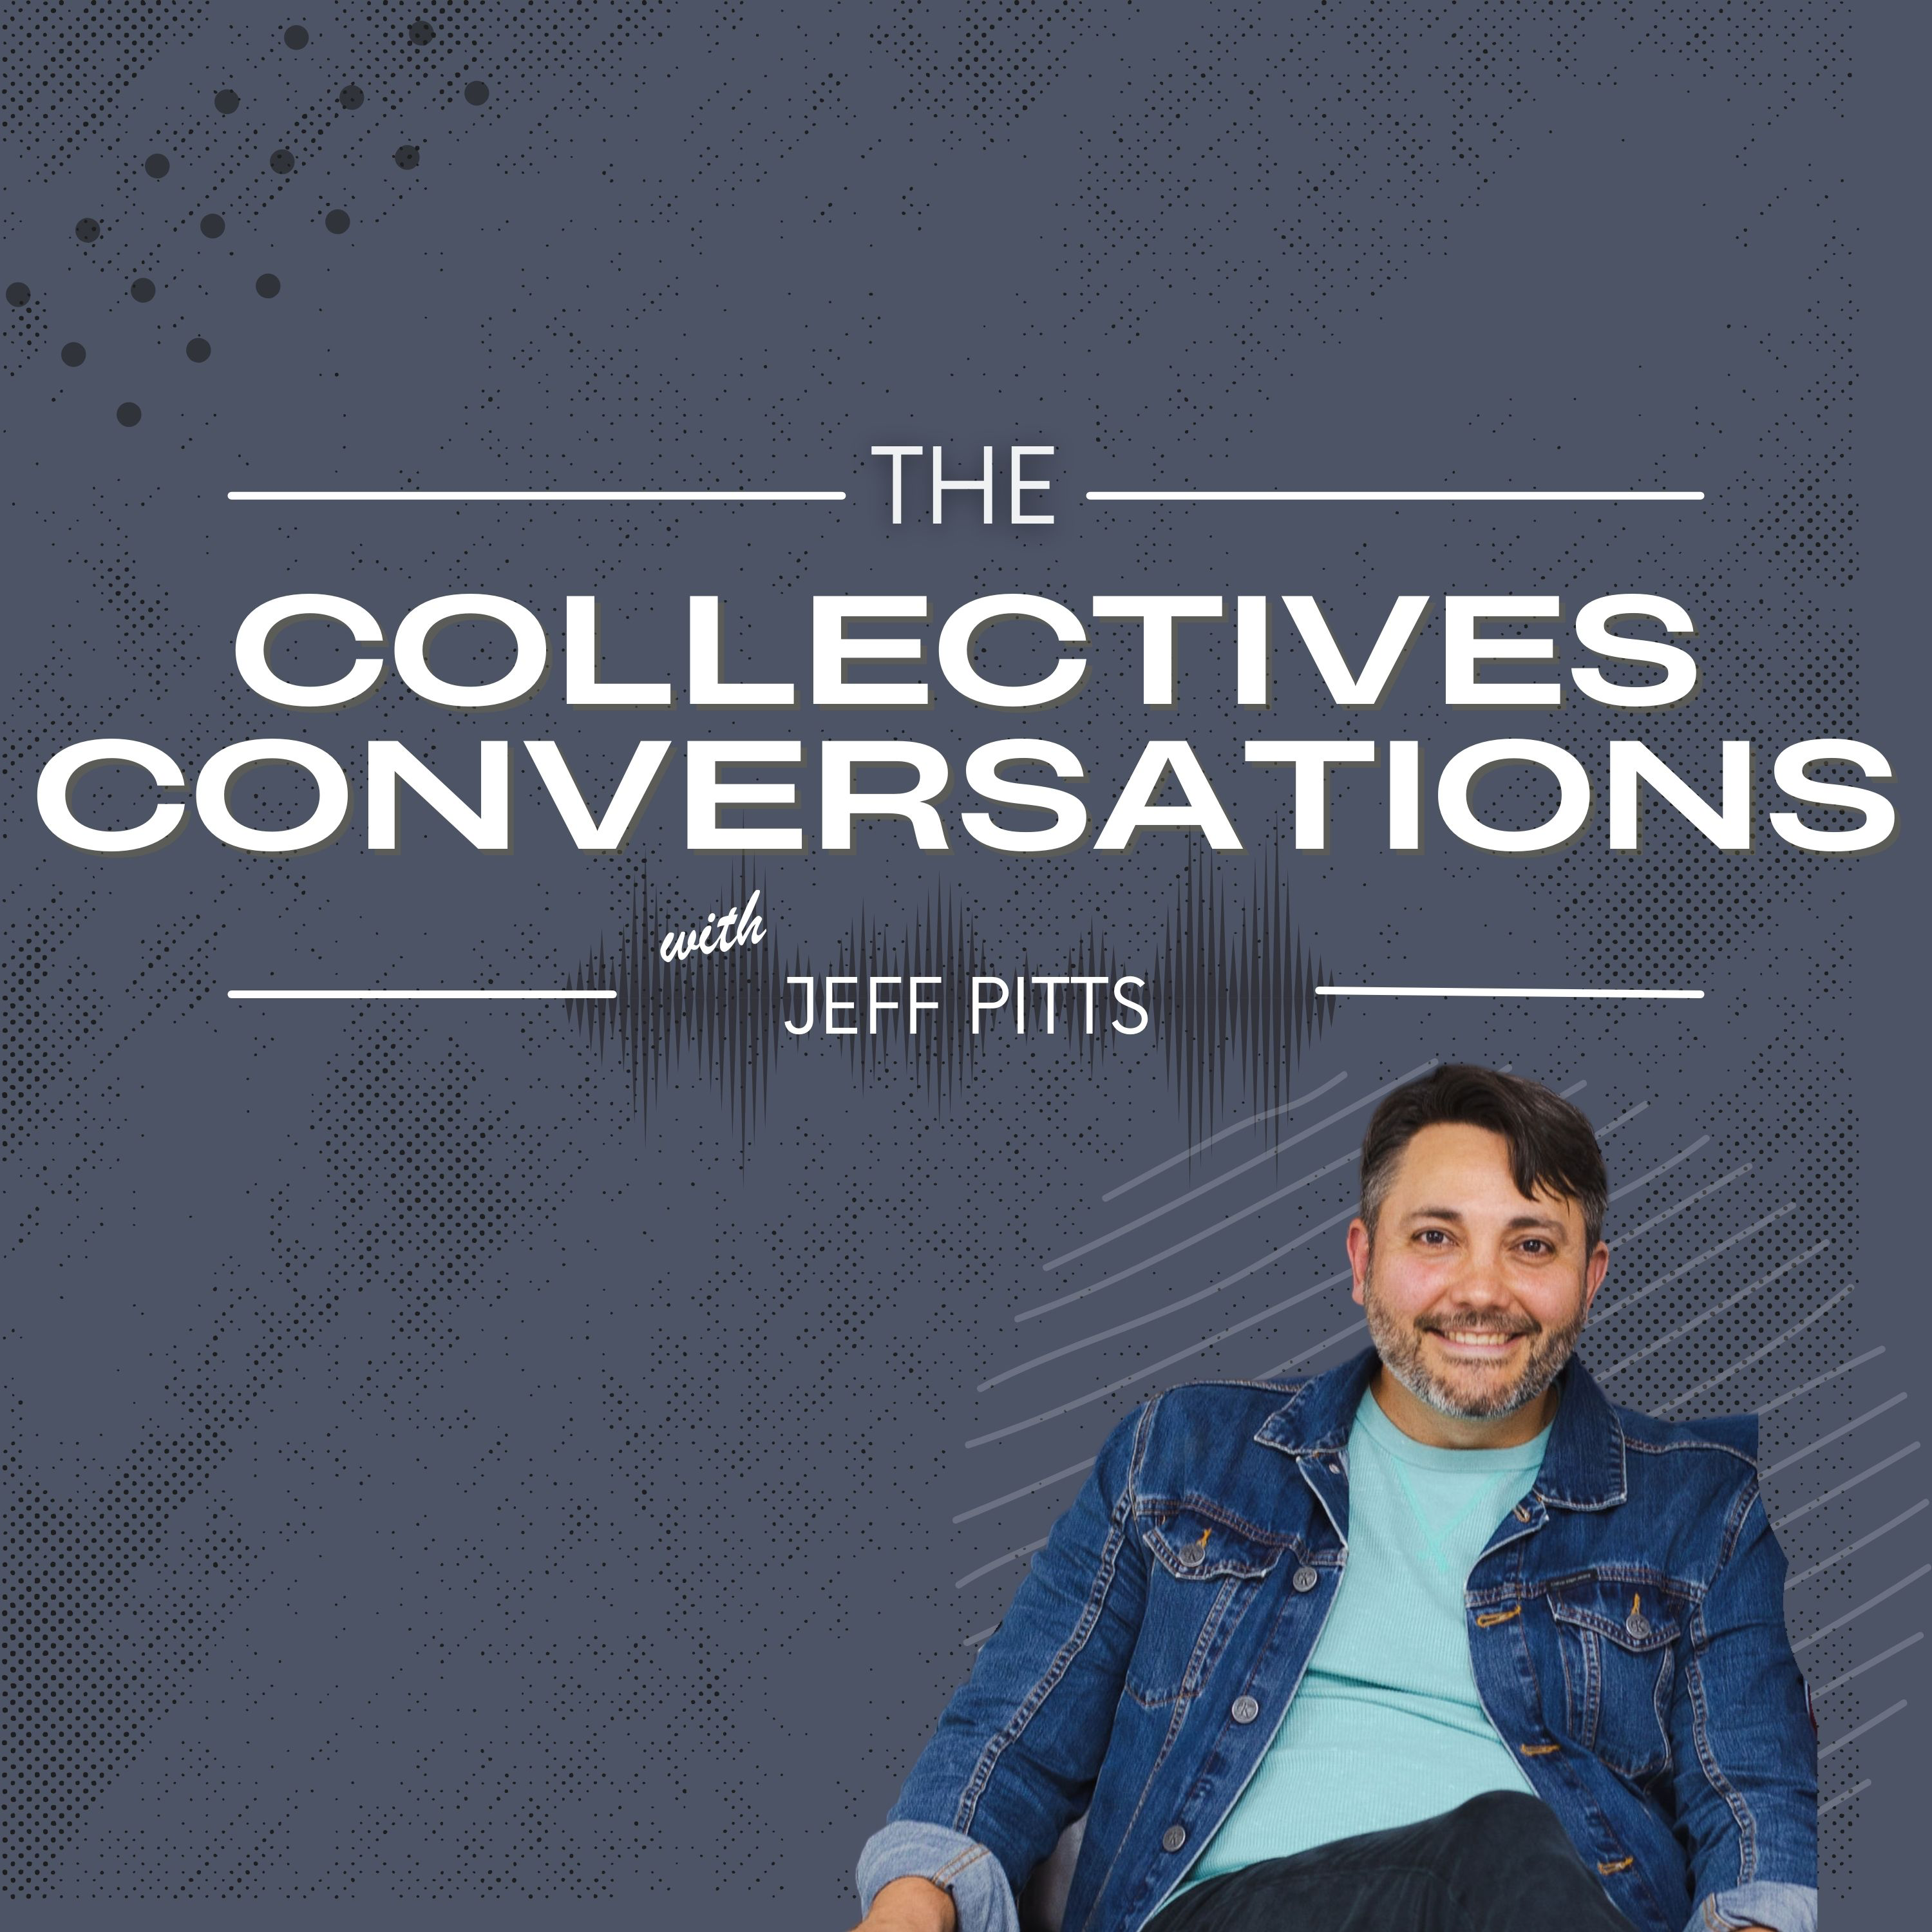 The Collectives Conversations with Jeff Pitts